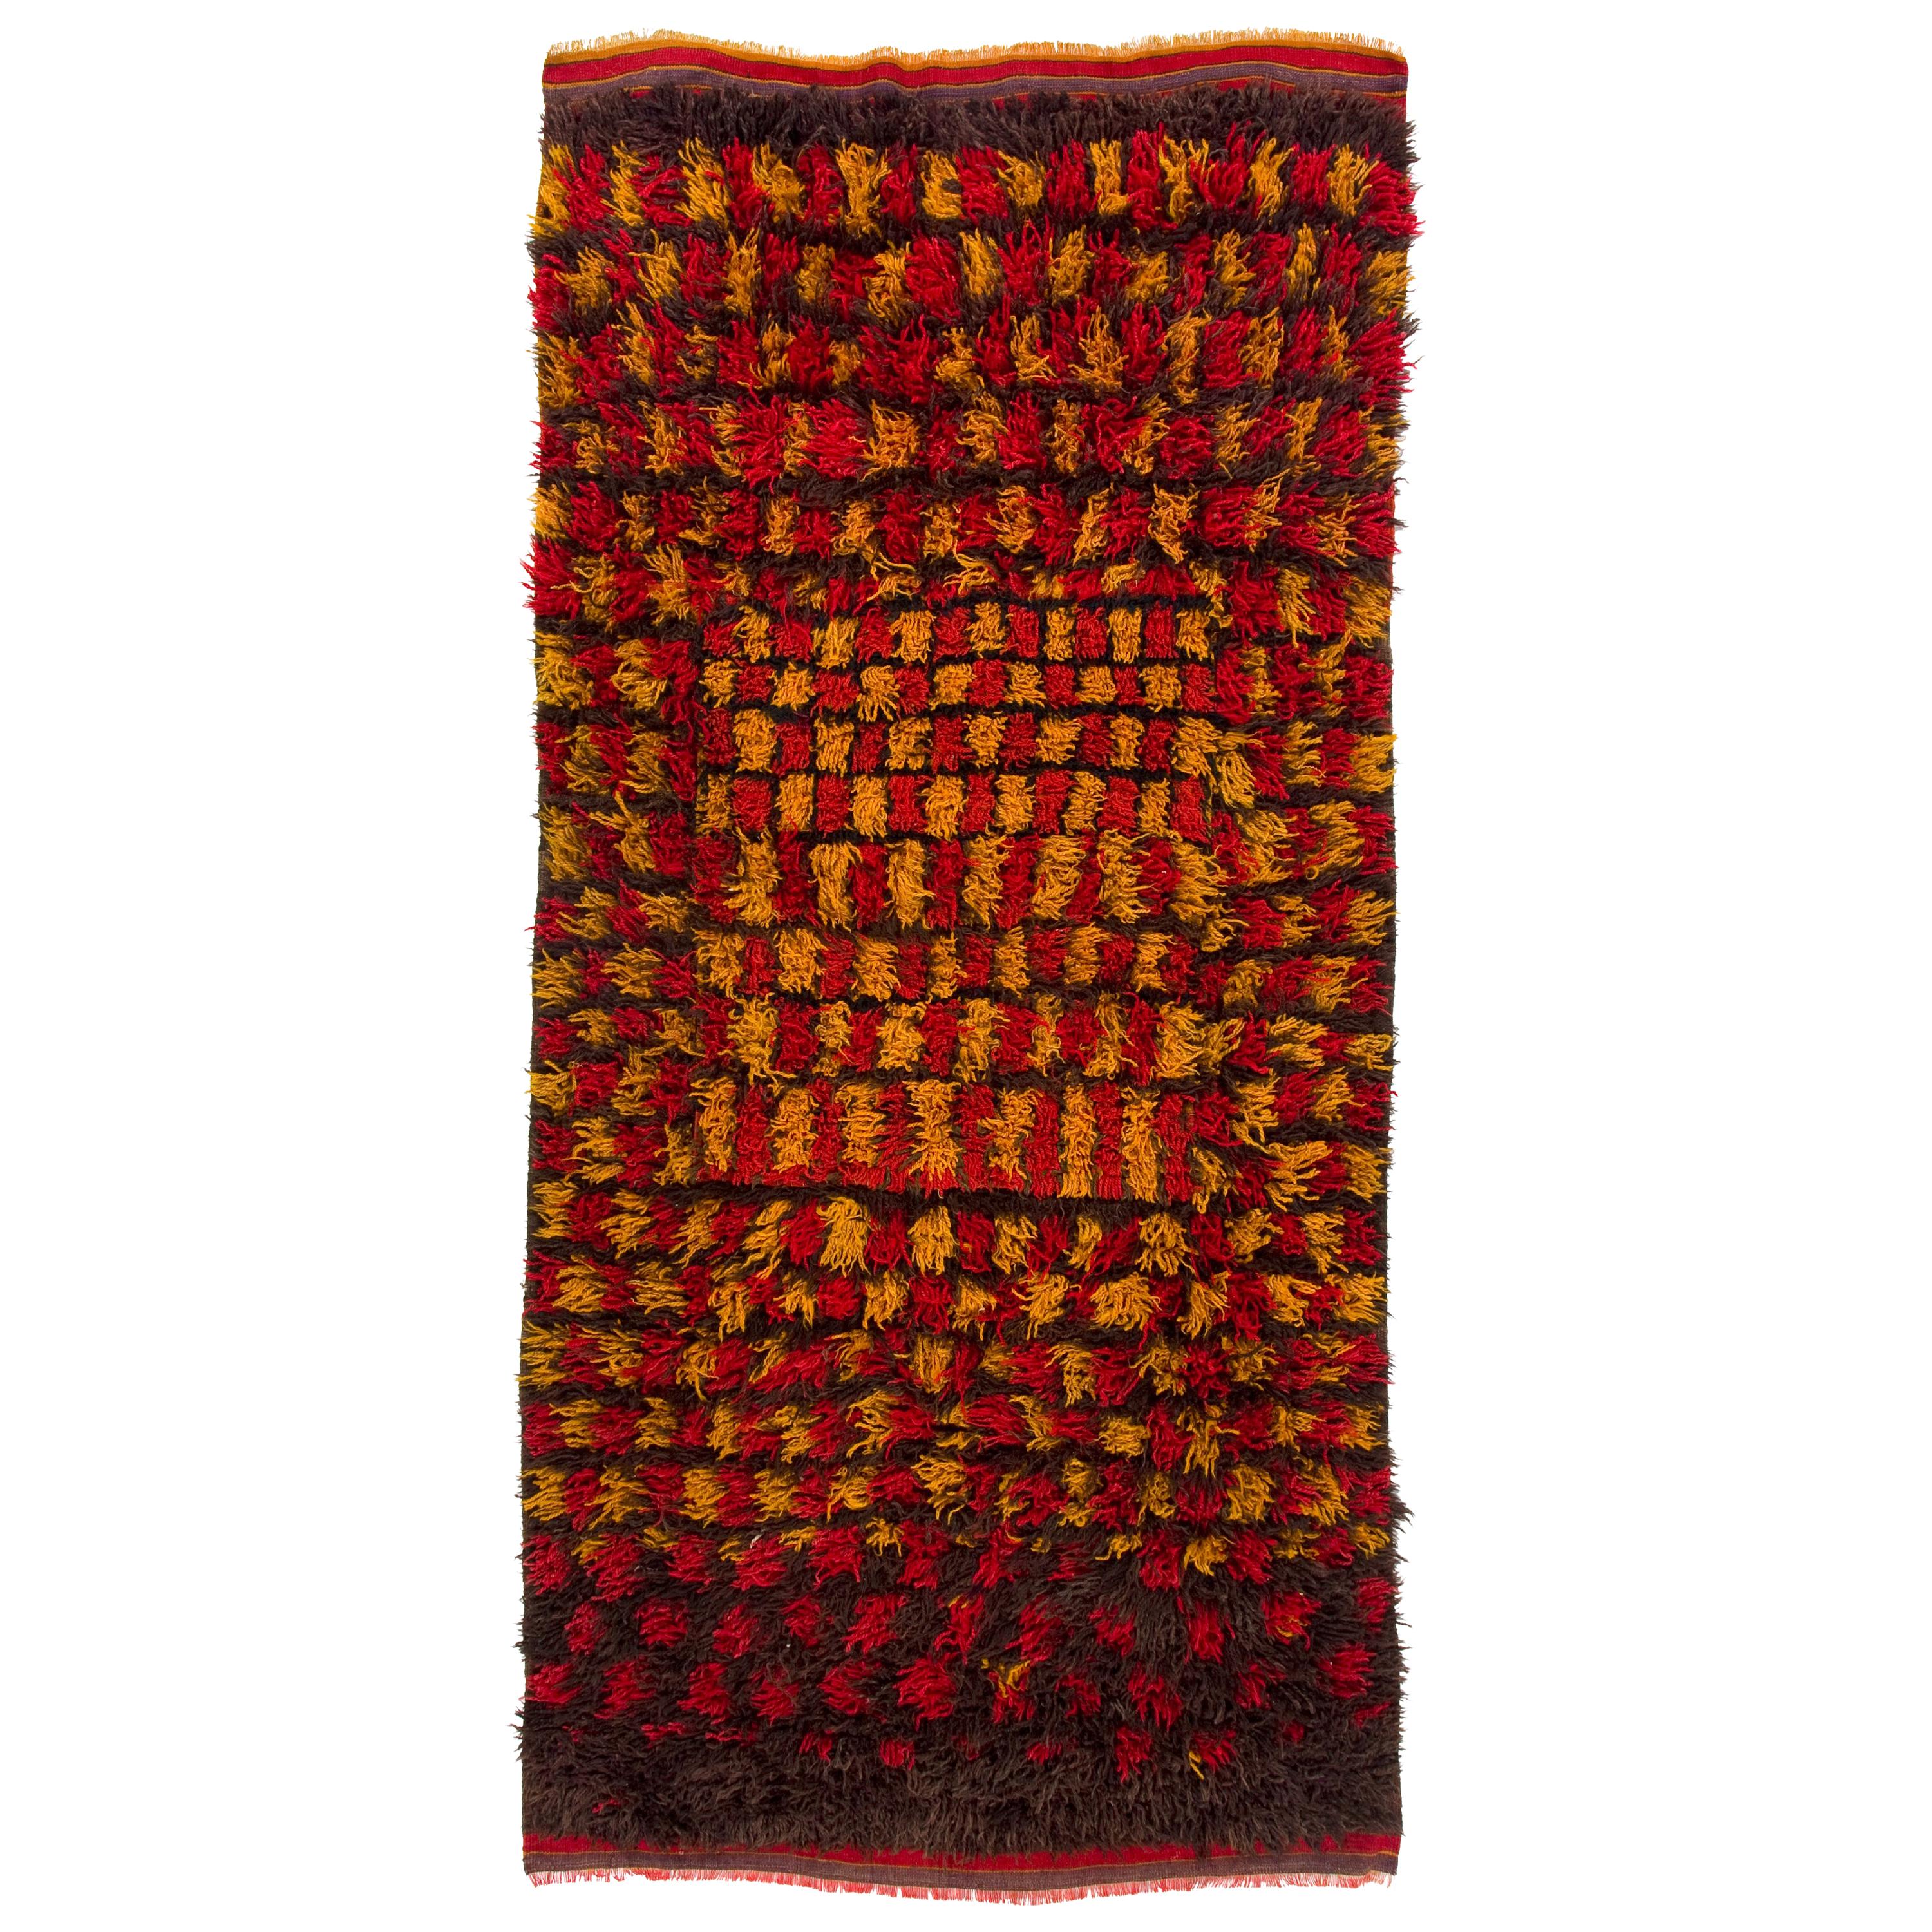 4.8x9.8 Ft Handmade "Tulu" Rug with Long Wool Pile in Red, Yellow & Brown Colors